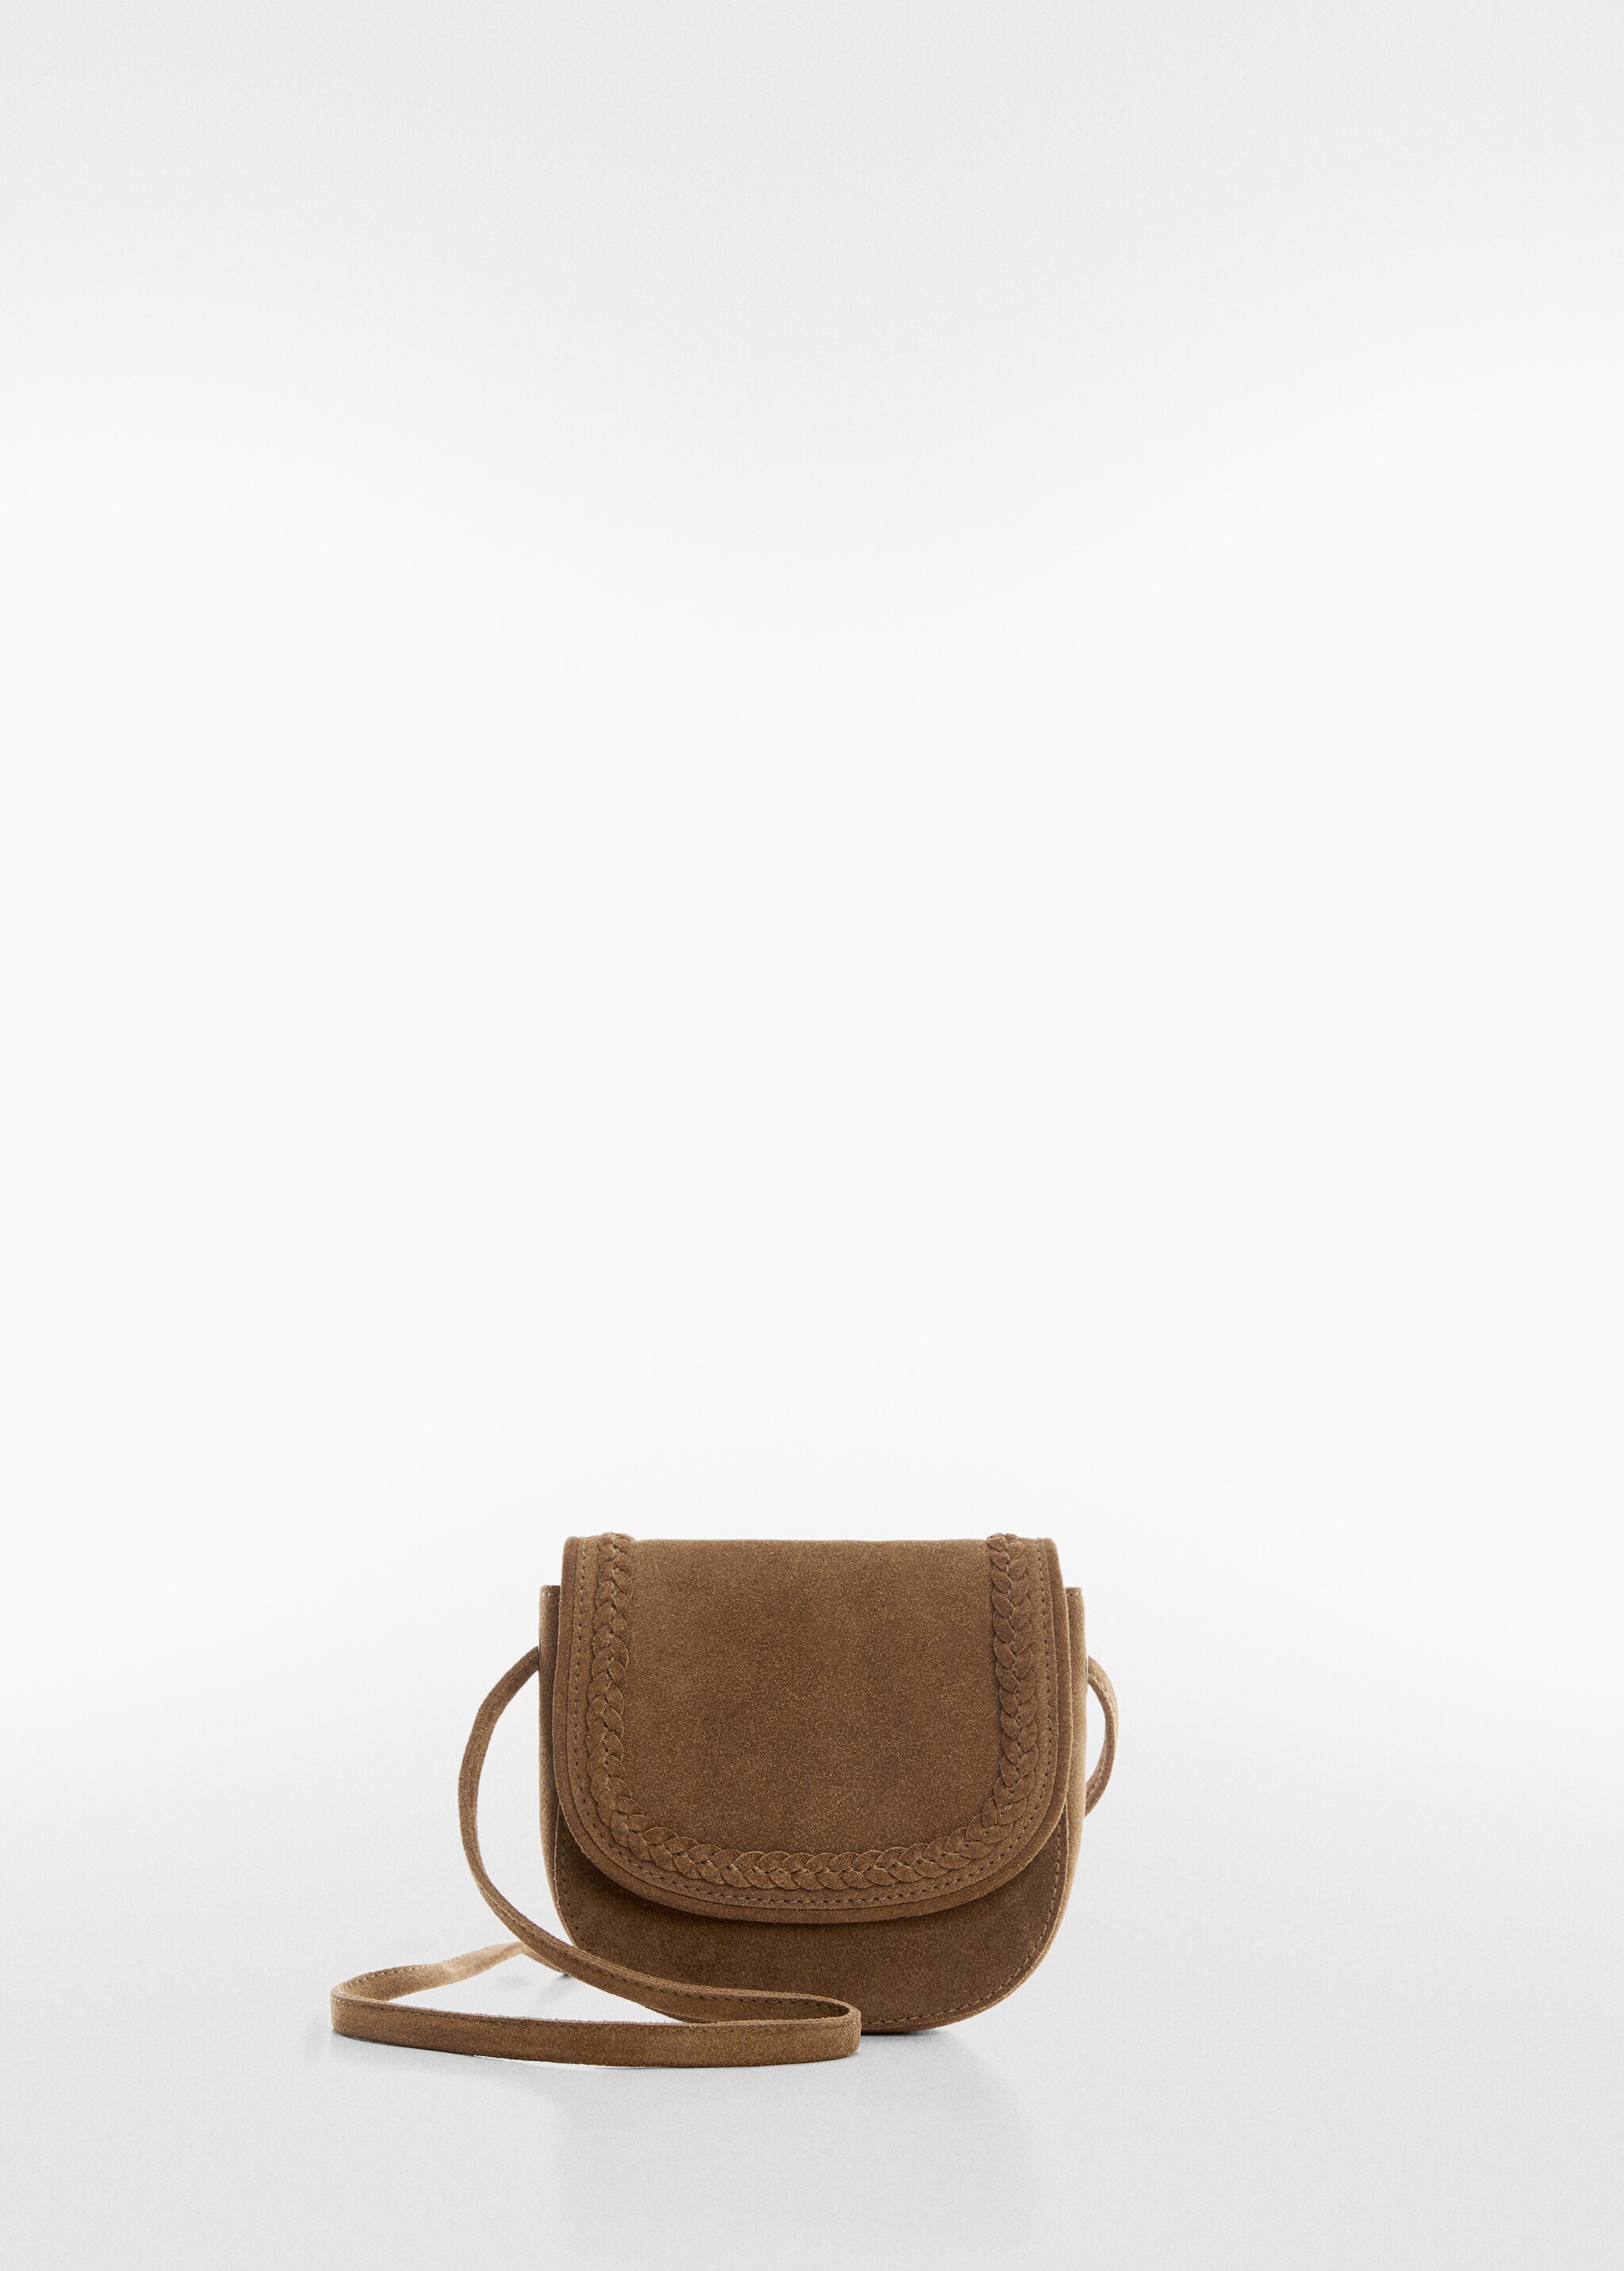 Flap leather bag - Article without model